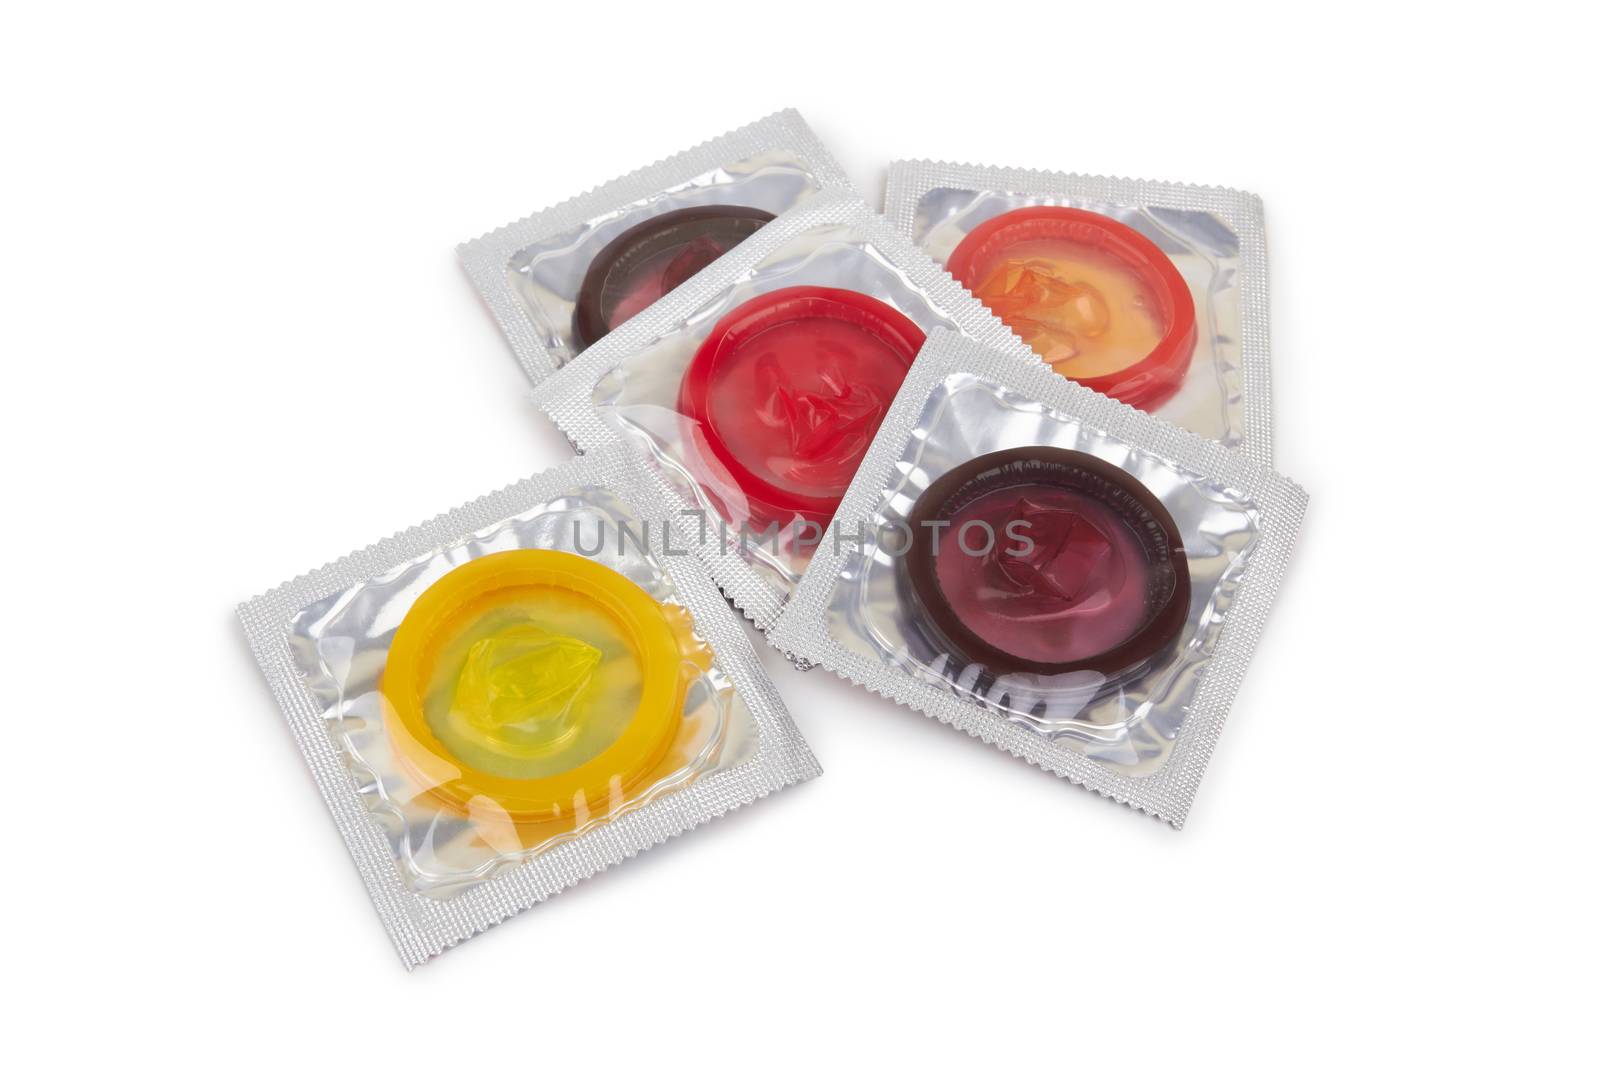 Colorful condoms isolated on white background